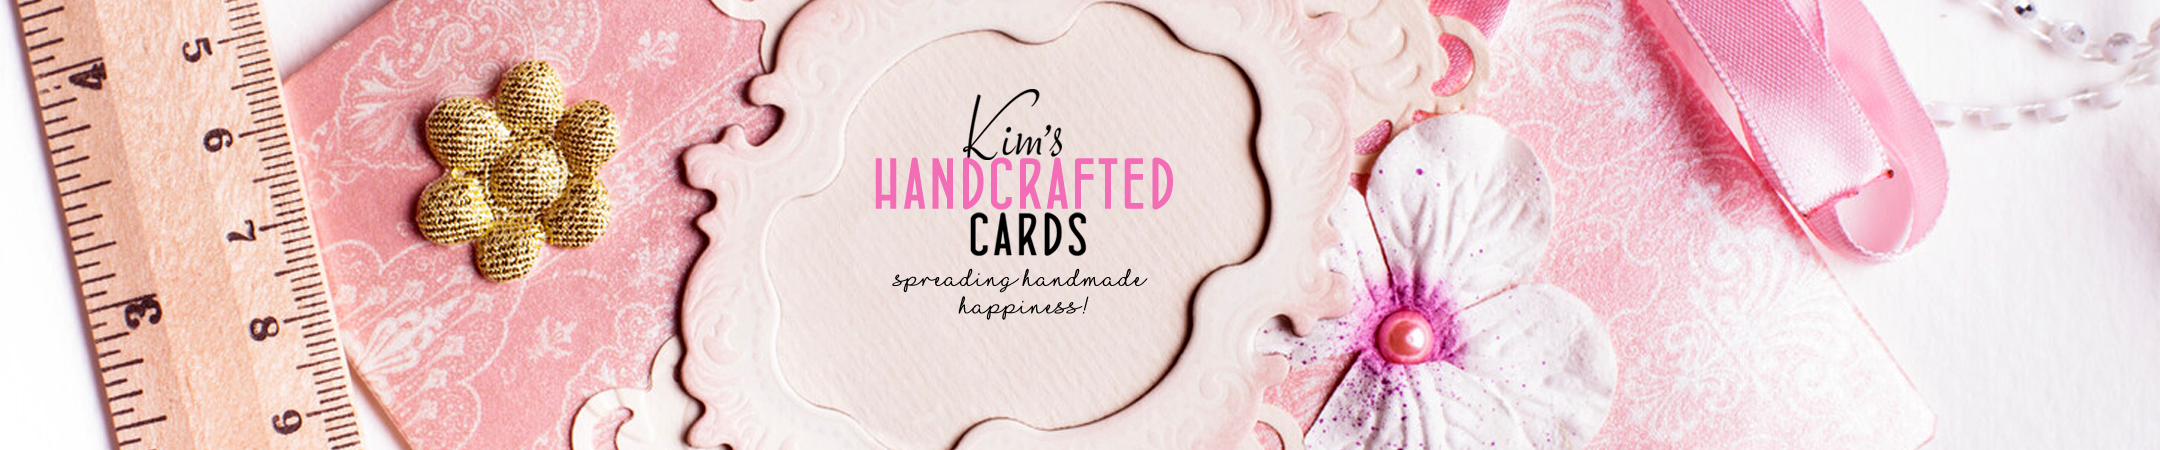 Kim's Handcrafted Cards ~ Spreading Handmade Happiness